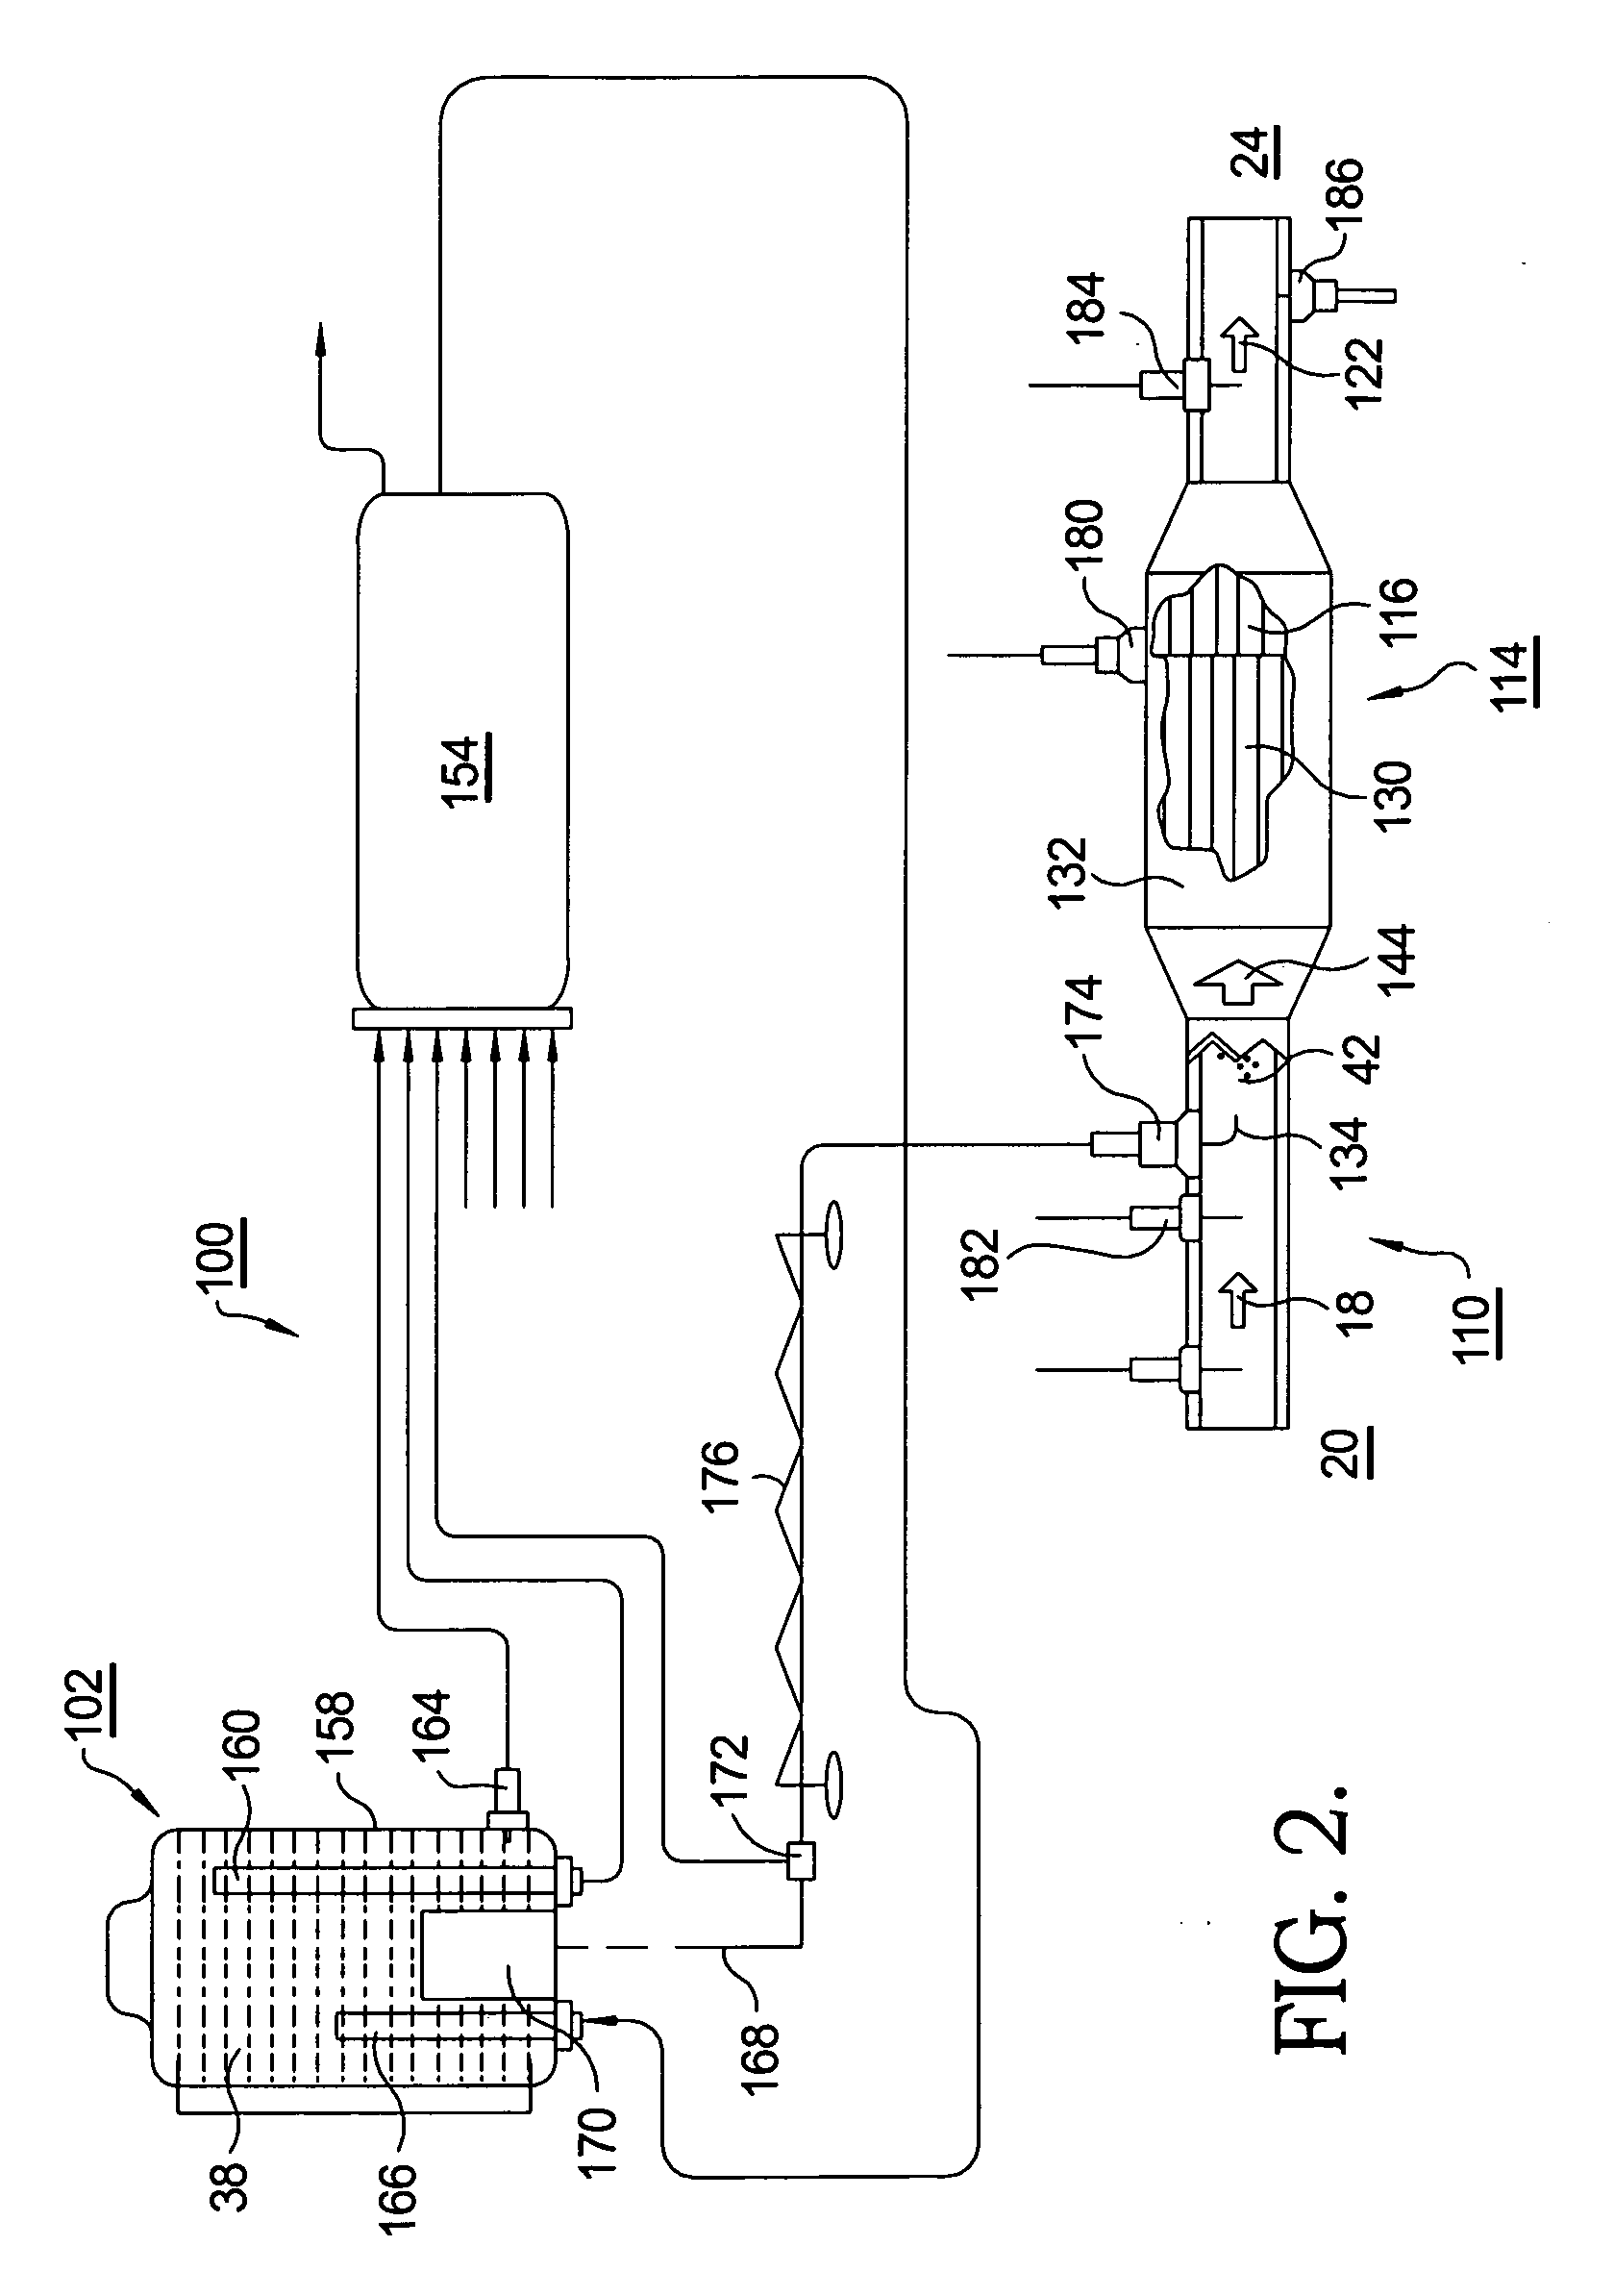 Selective NOx catalytic reduction system including an ammonia sensor